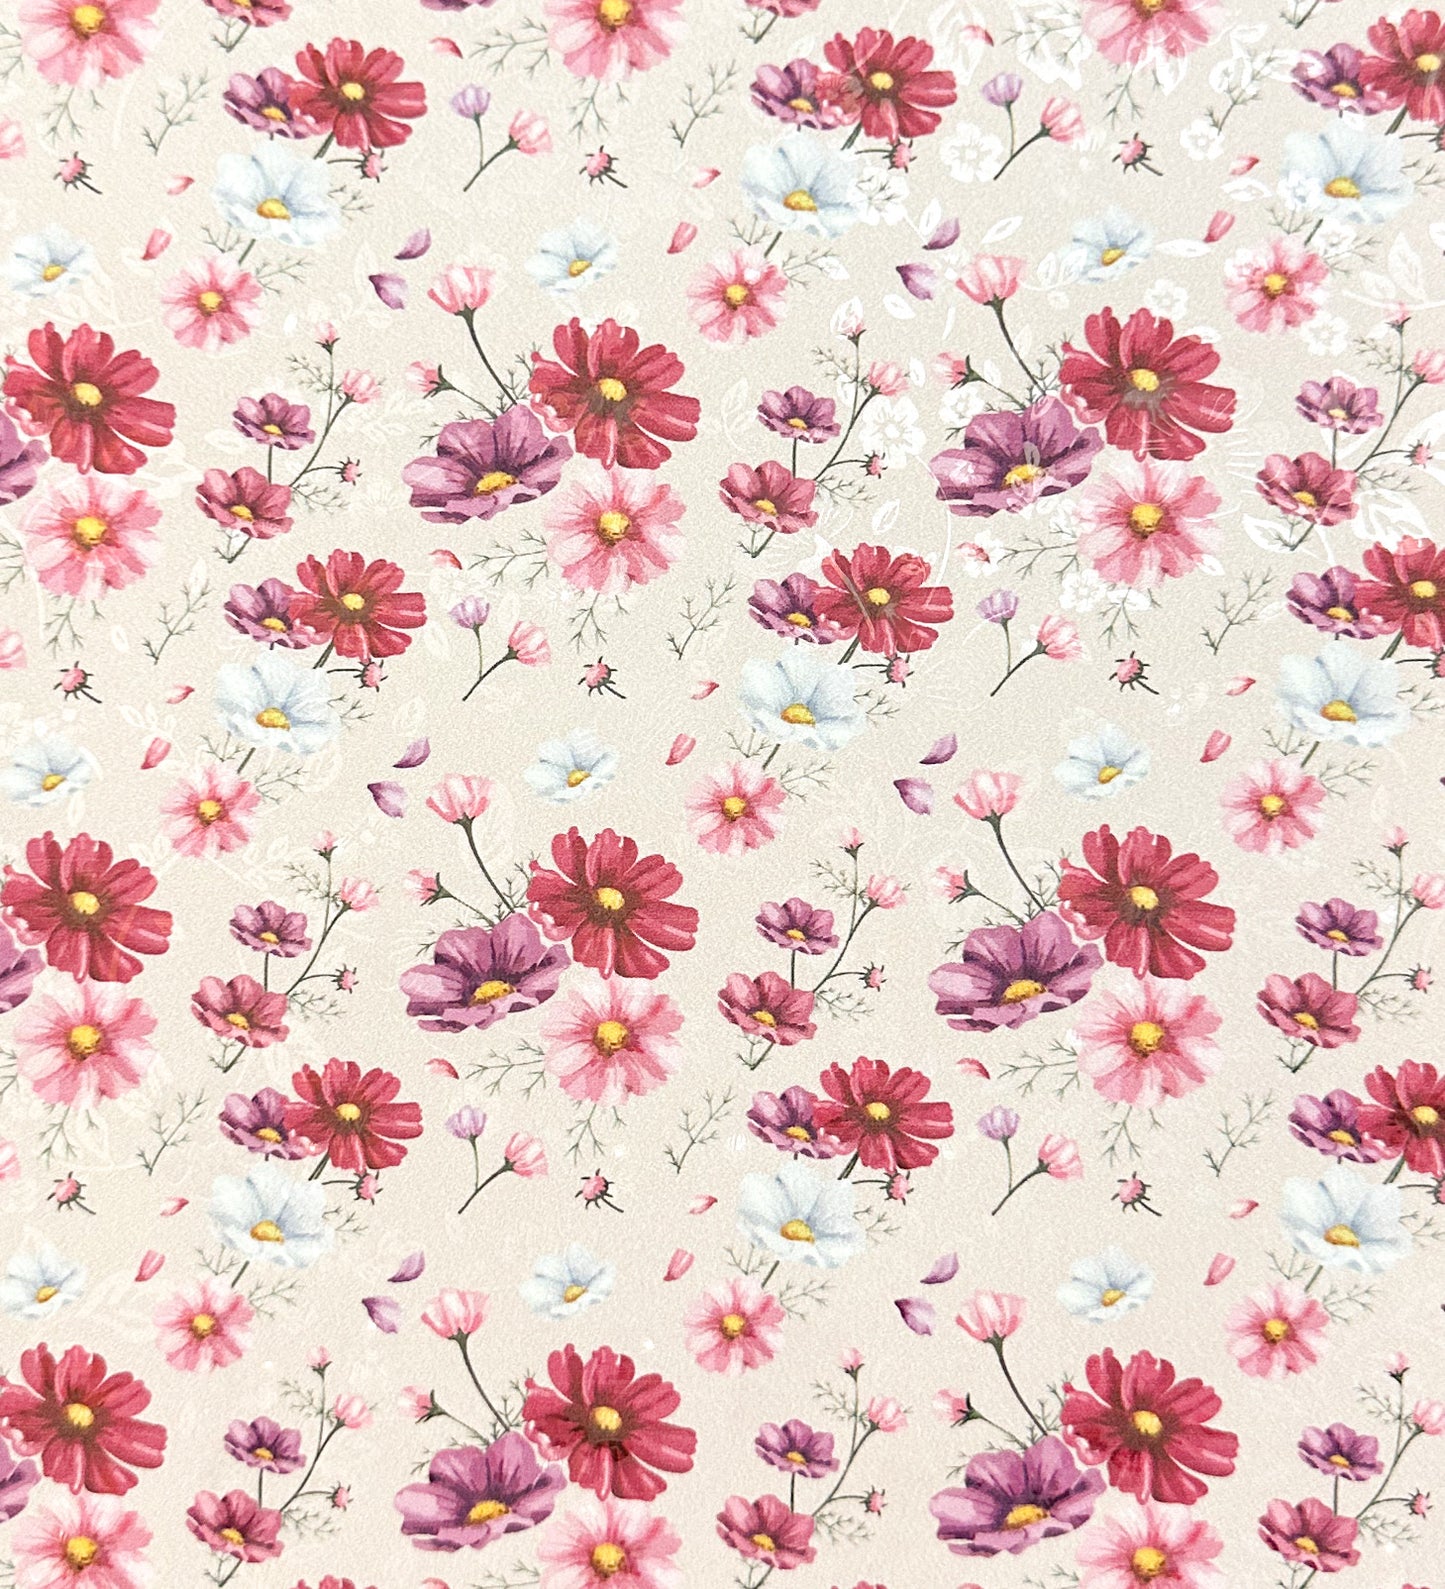 Pink daisies faux leather vinyl sheet